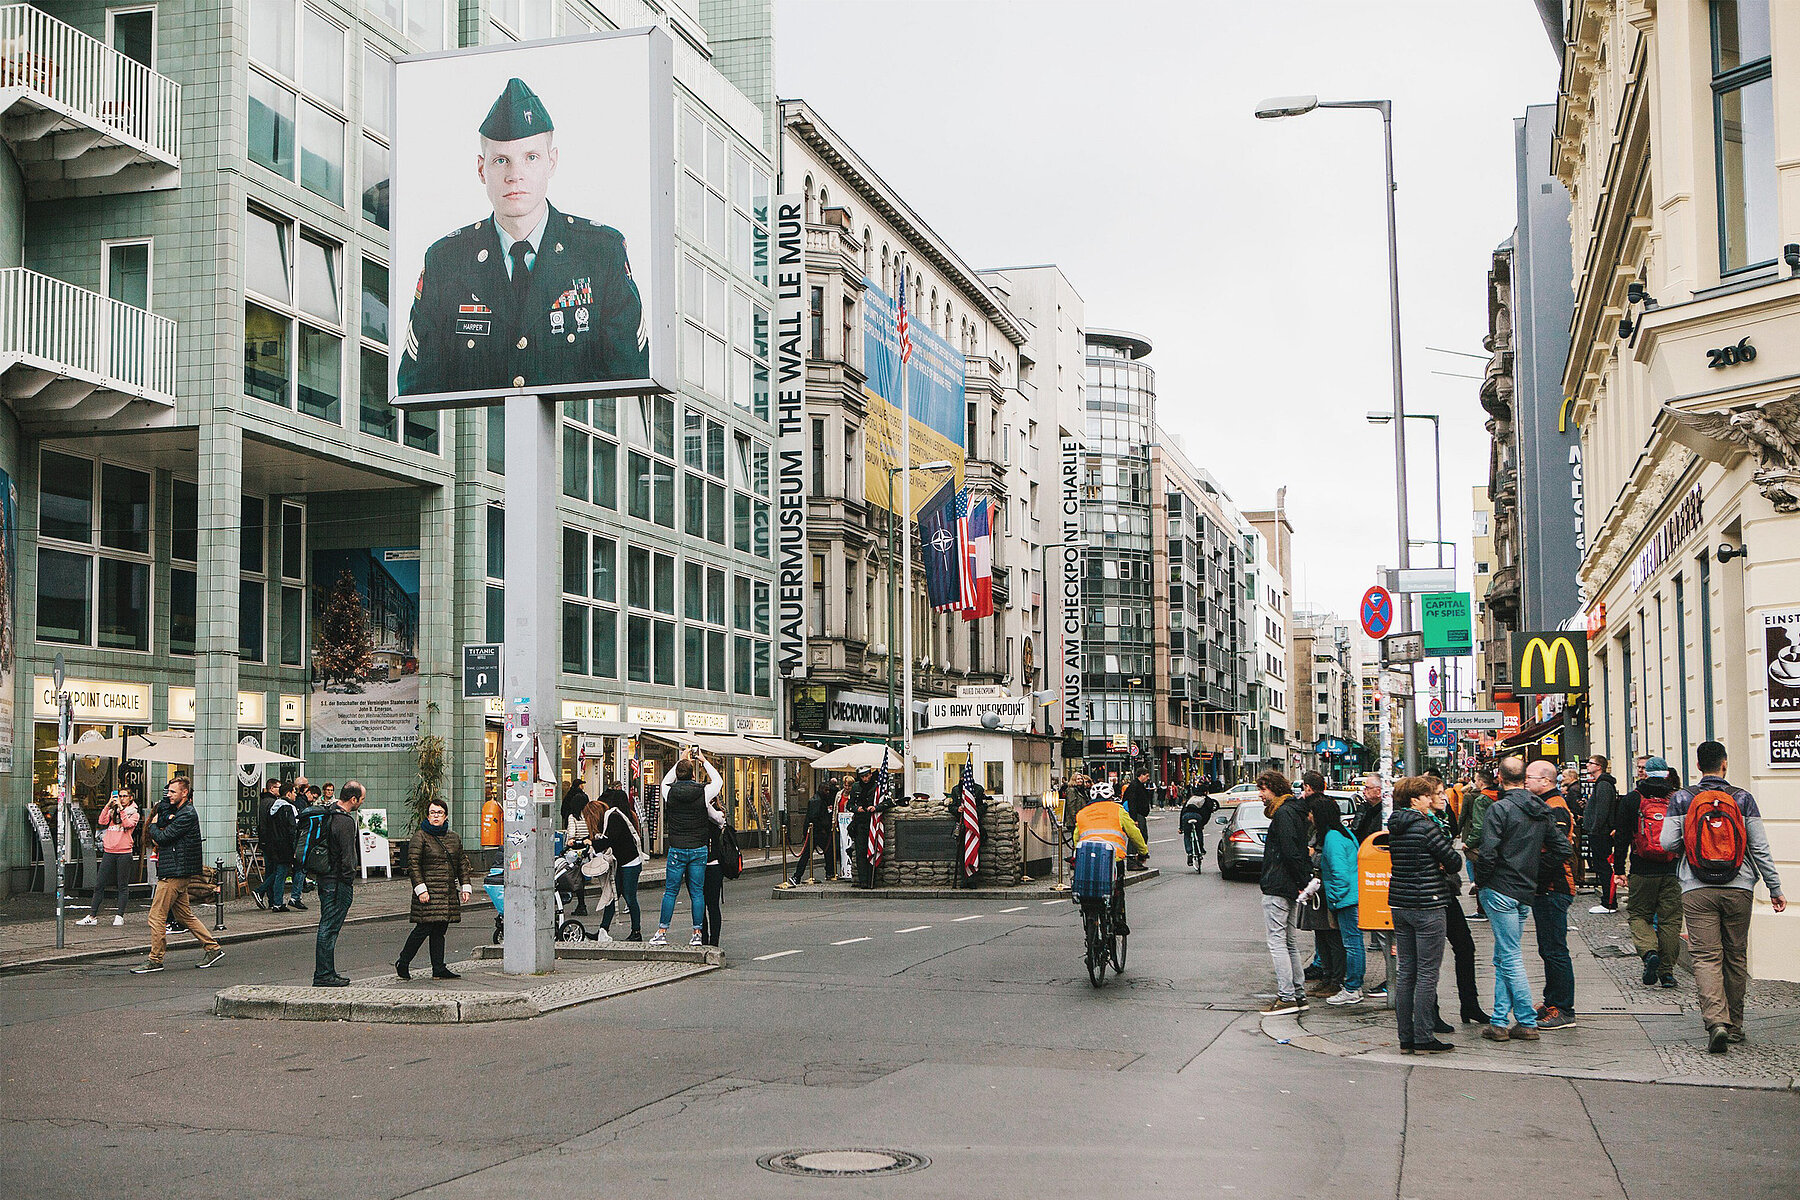 In the foreground is a large photograph of a U.S. soldier, in the background is the Allied control booth. On the left, the Mauermuseum.